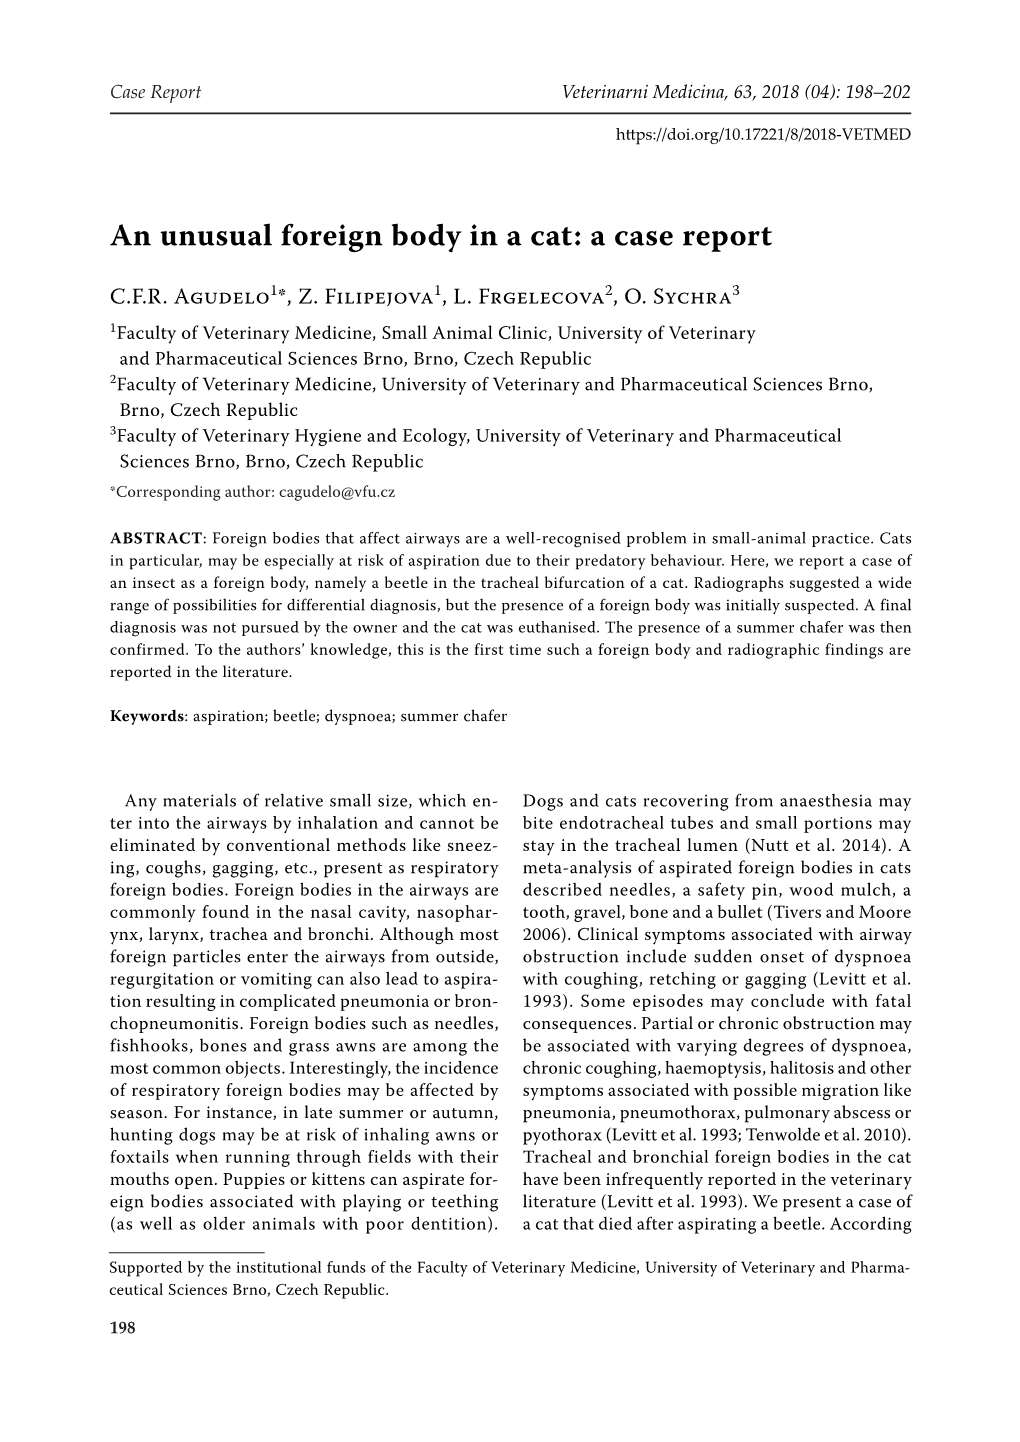 An Unusual Foreign Body in a Cat: a Case Report